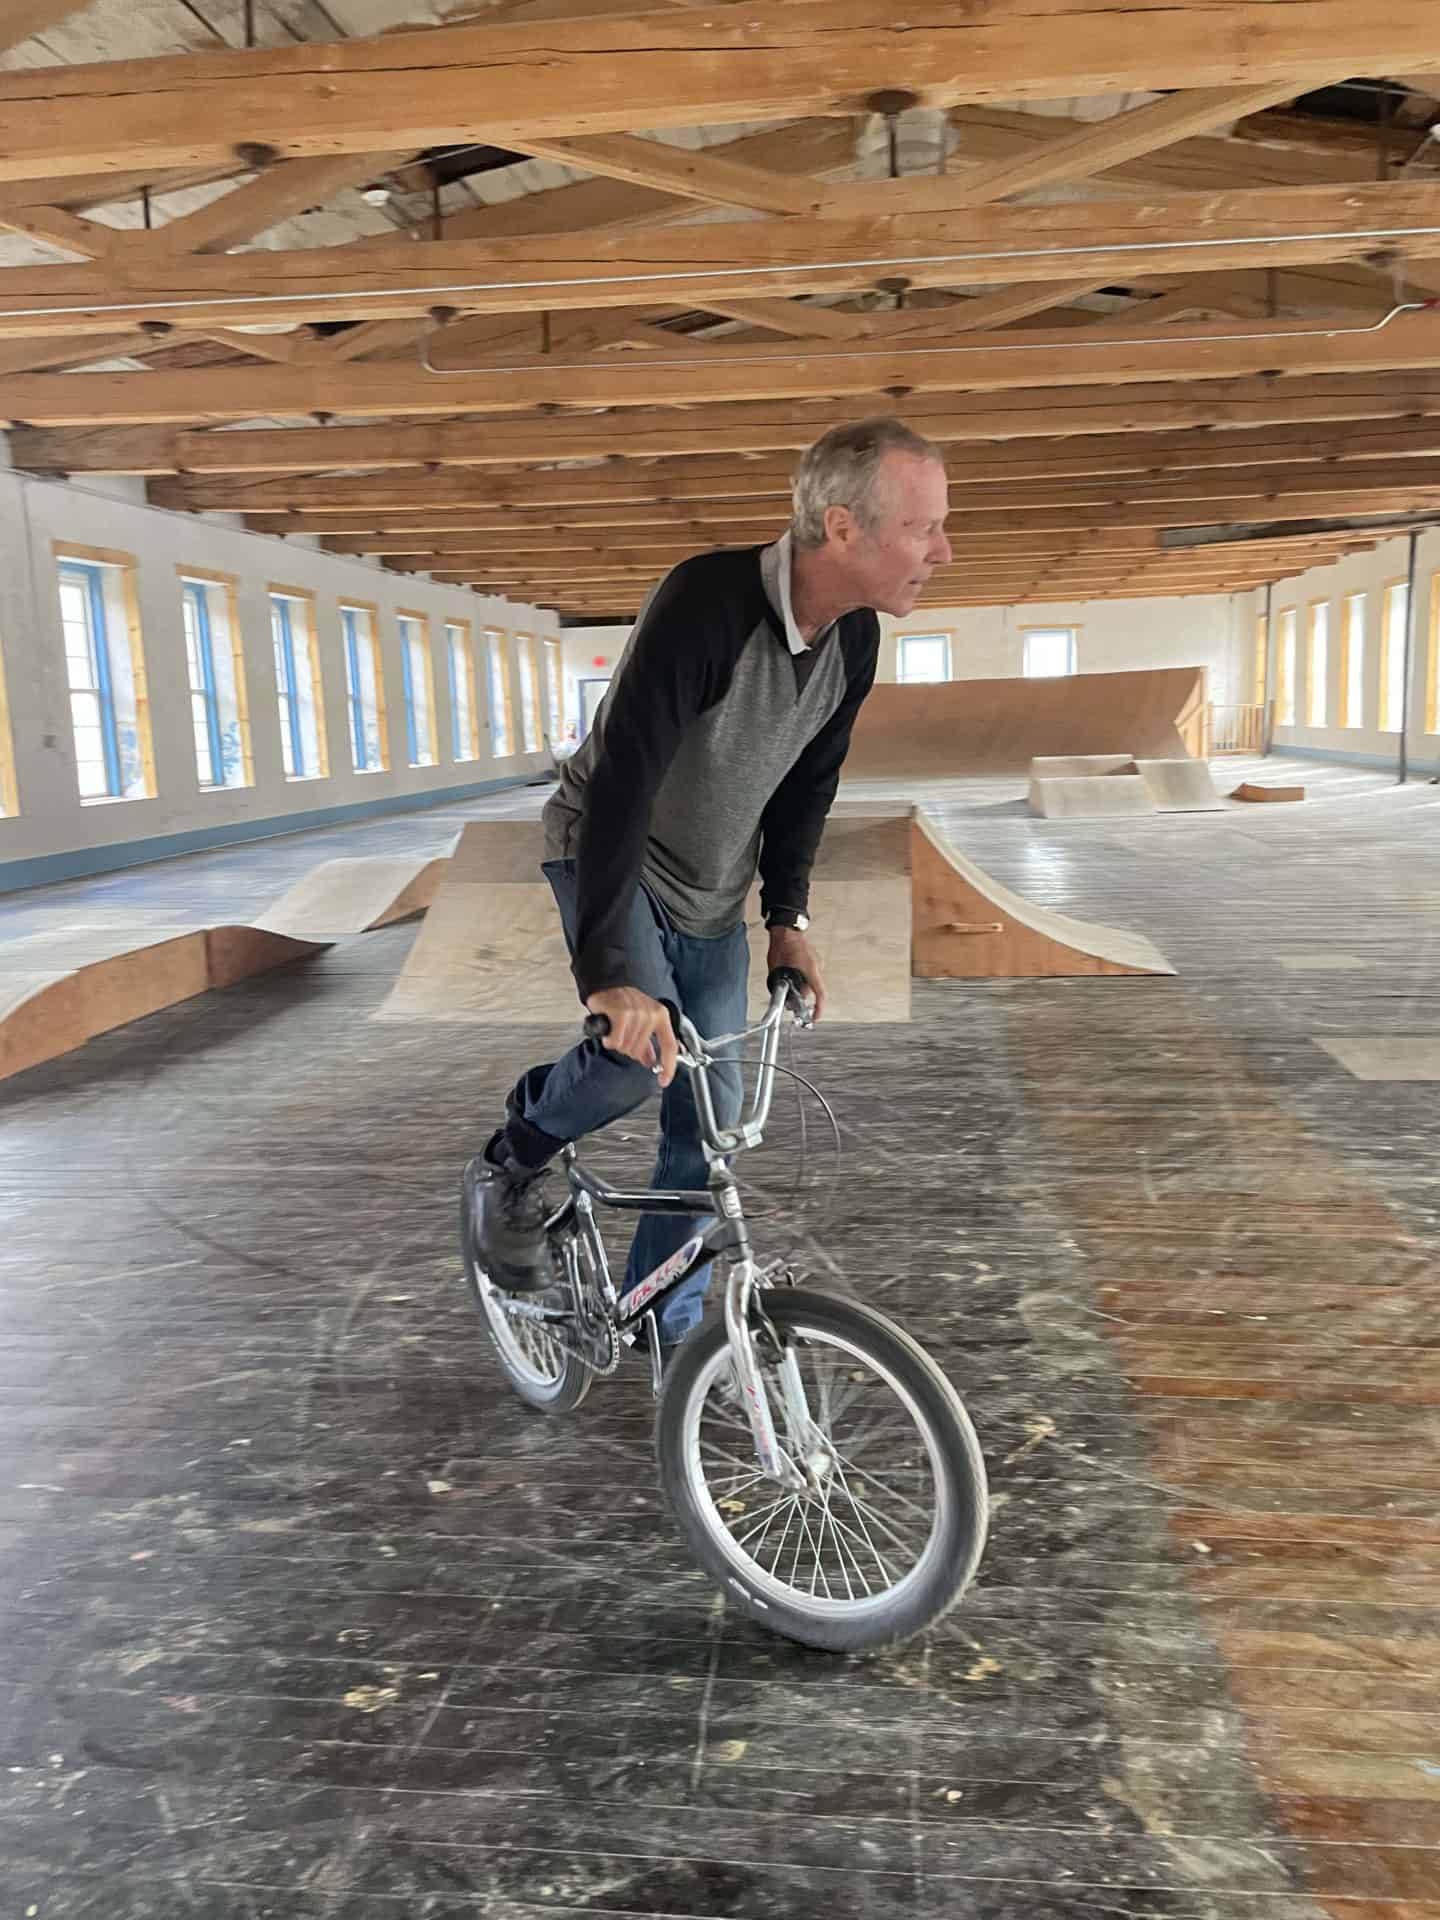 Michael Augsourger rides a bike though an indoor course at the Old Stone Mill in Adams.